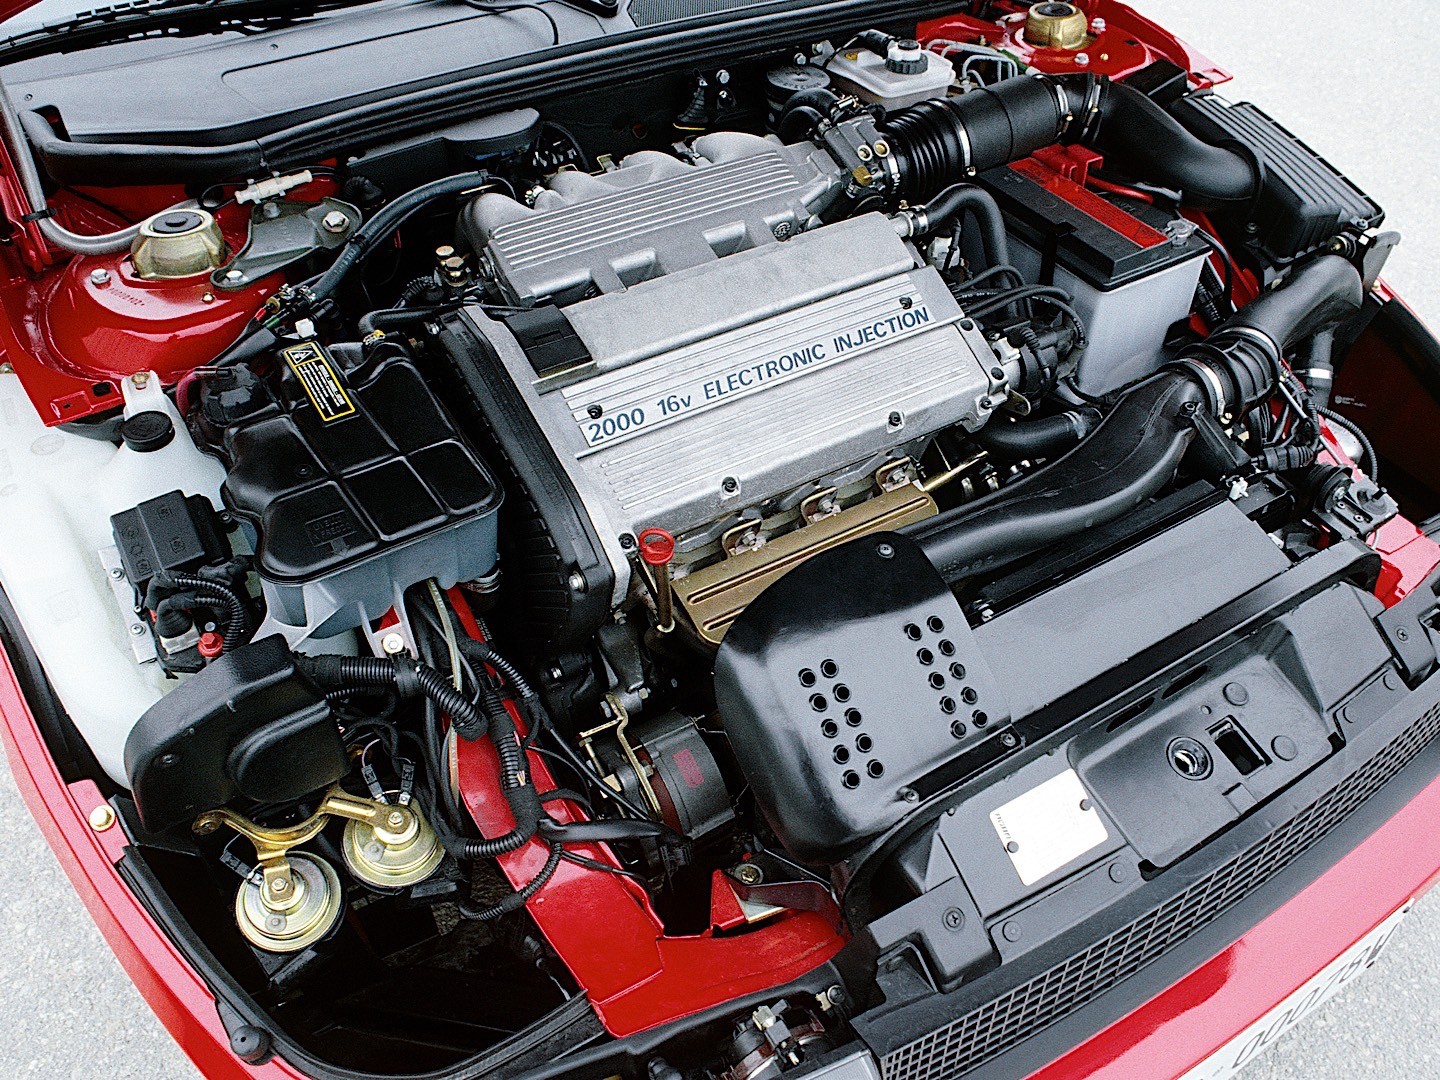 FIAT-Coupe-836_10 engine bay.jpg